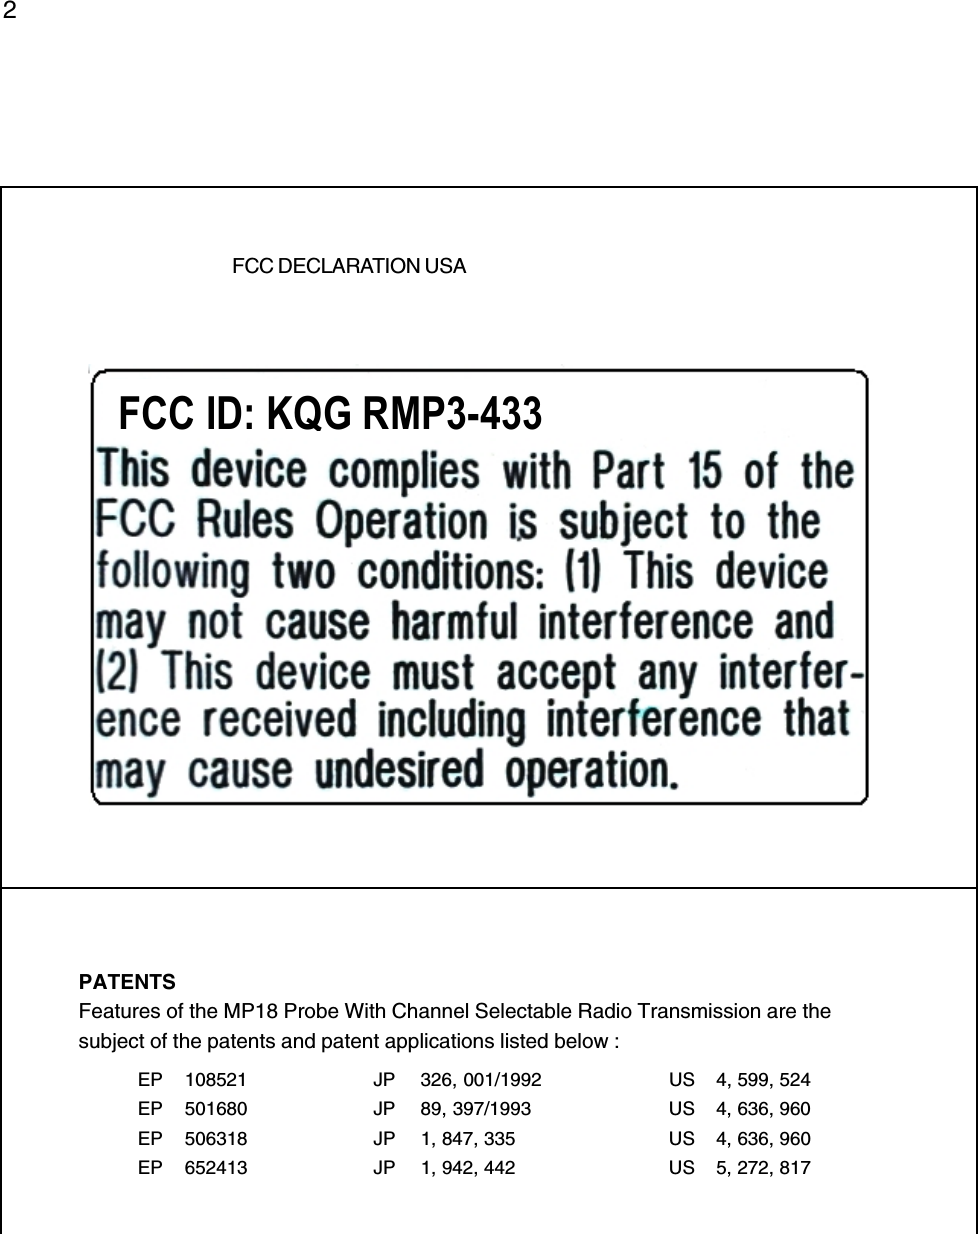 2PATENTSFeatures of the MP18 Probe With Channel Selectable Radio Transmission are thesubject of the patents and patent applications listed below :EP 108521 JP 326, 001/1992 US 4, 599, 524EP 501680 JP 89, 397/1993 US 4, 636, 960EP 506318 JP 1, 847, 335 US 4, 636, 960EP 652413 JP 1, 942, 442 US 5, 272, 817FCC DECLARATION USAFCC ID: KQG RMP3-433